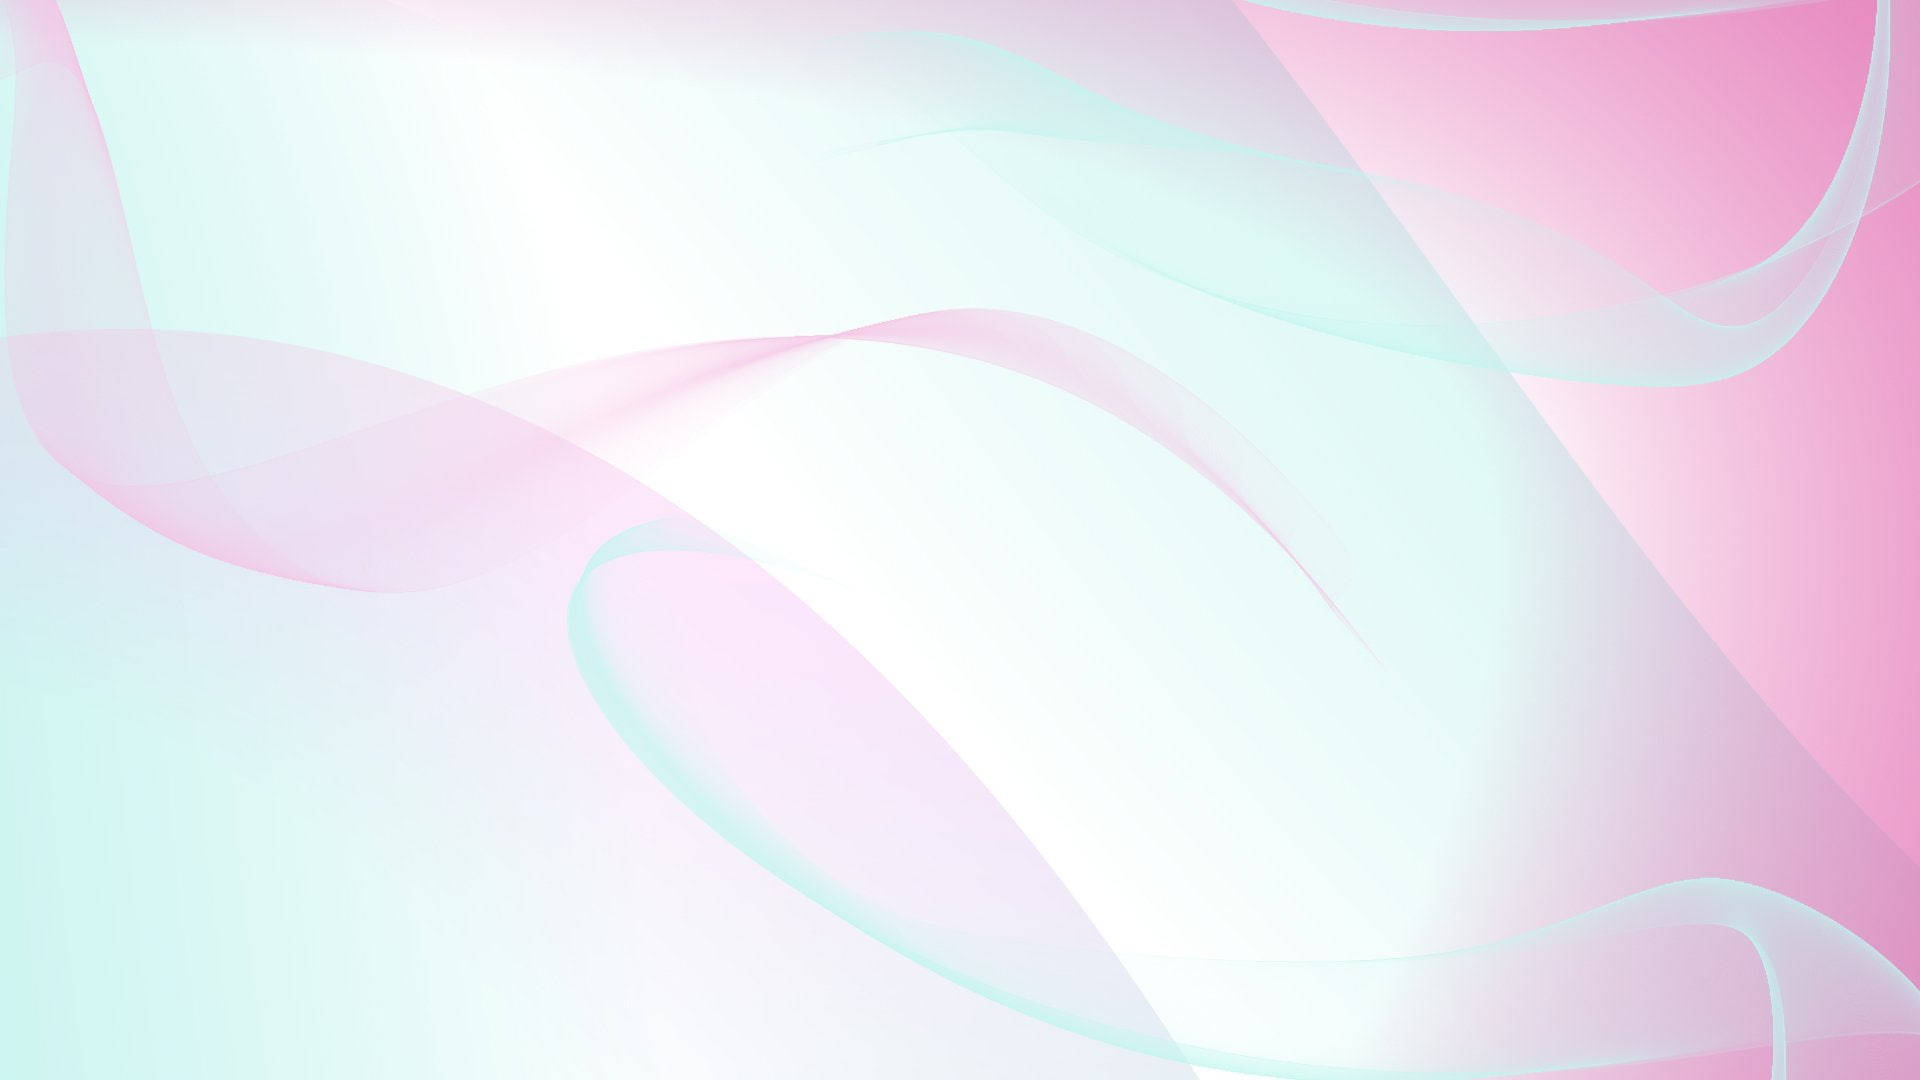 Watch The Beauty Of Colors Unfold In A Pastel Abstract Painting Wallpaper